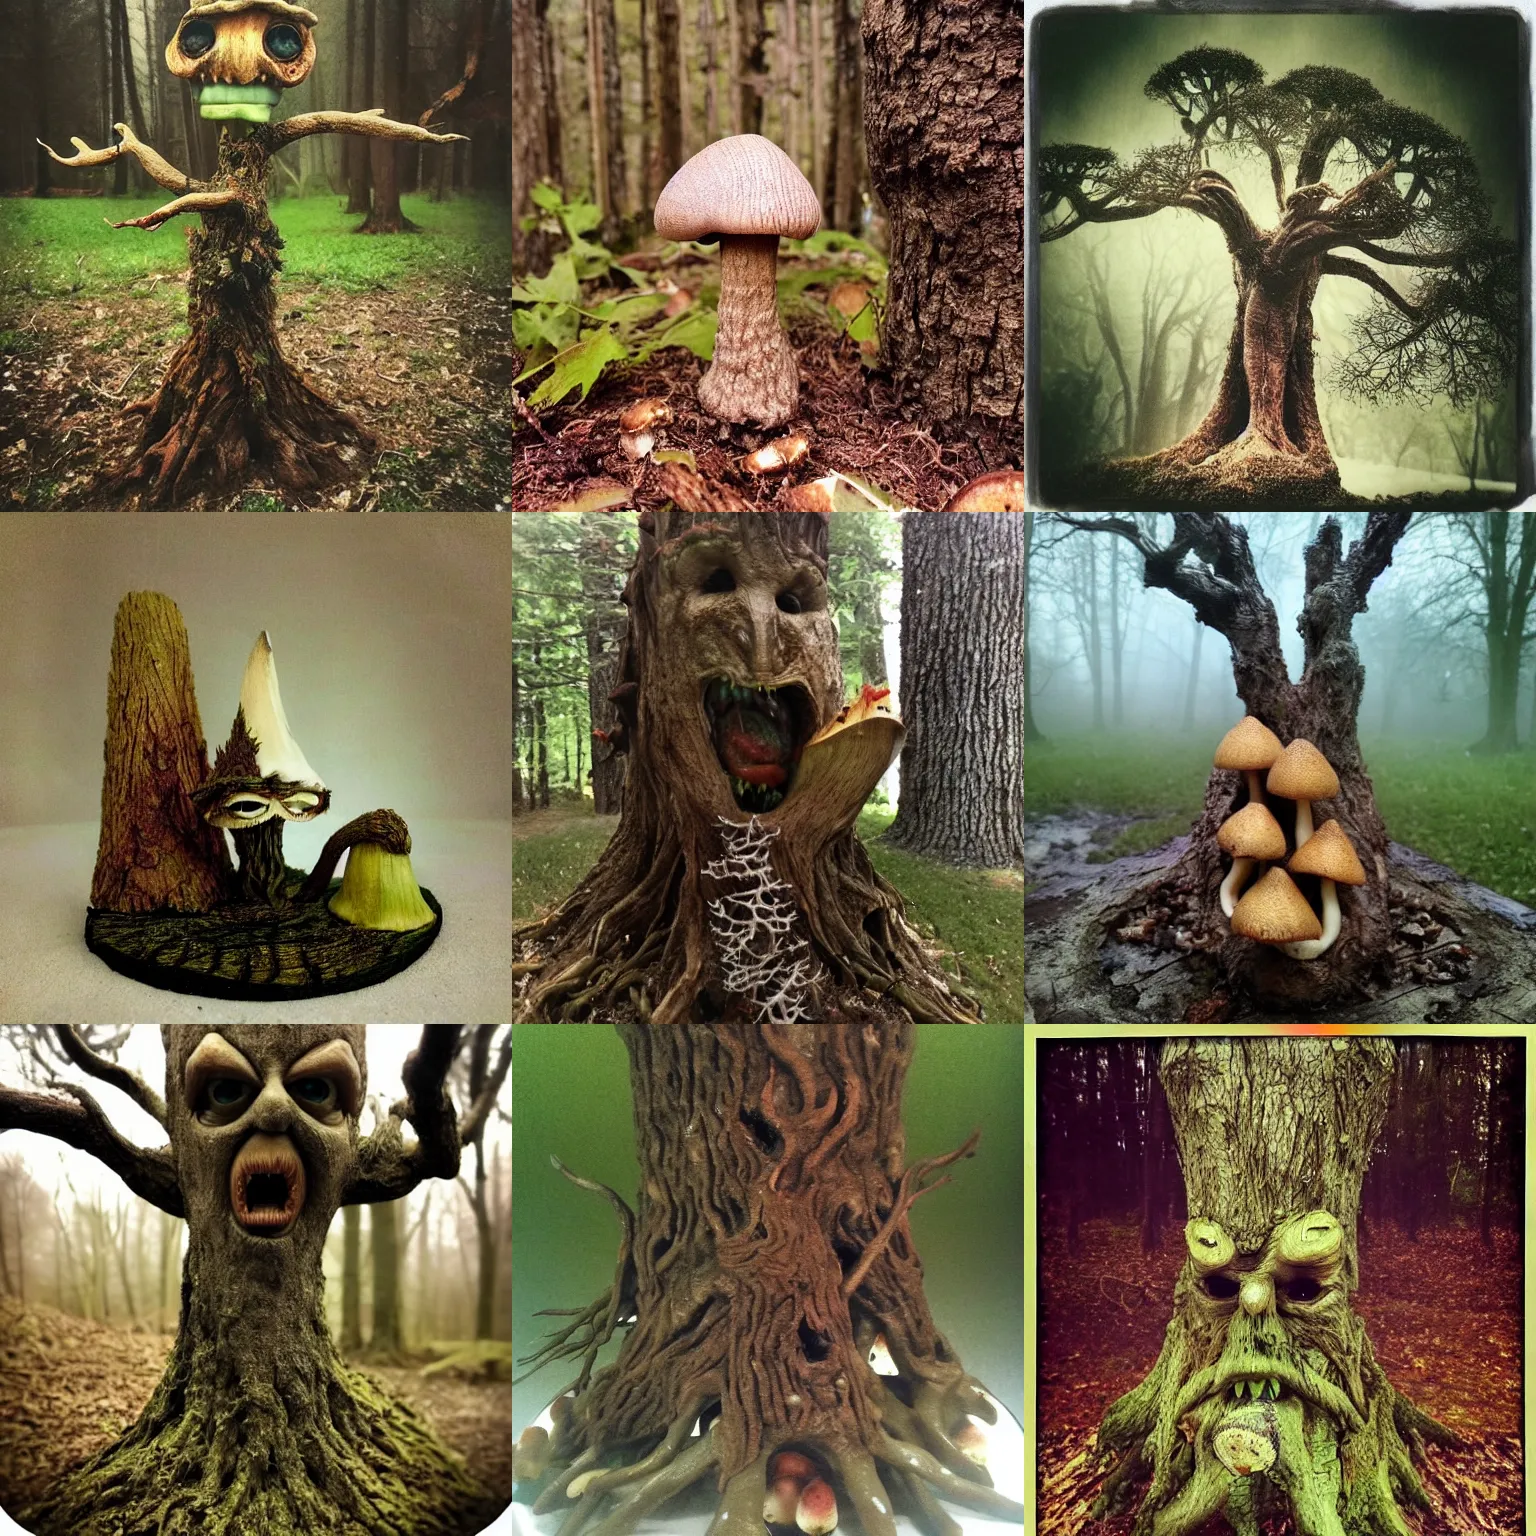 Prompt: angry hungry evil treebeard ent oak tree eating amanita mushrooms!!! 🍄 stuffing mushrooms!!! into his gaping maw, dark fantasy horror, ominous, disturbing tortured face made of wood, oak tree treant, foggy, eerie mist, low quality instant camera photo